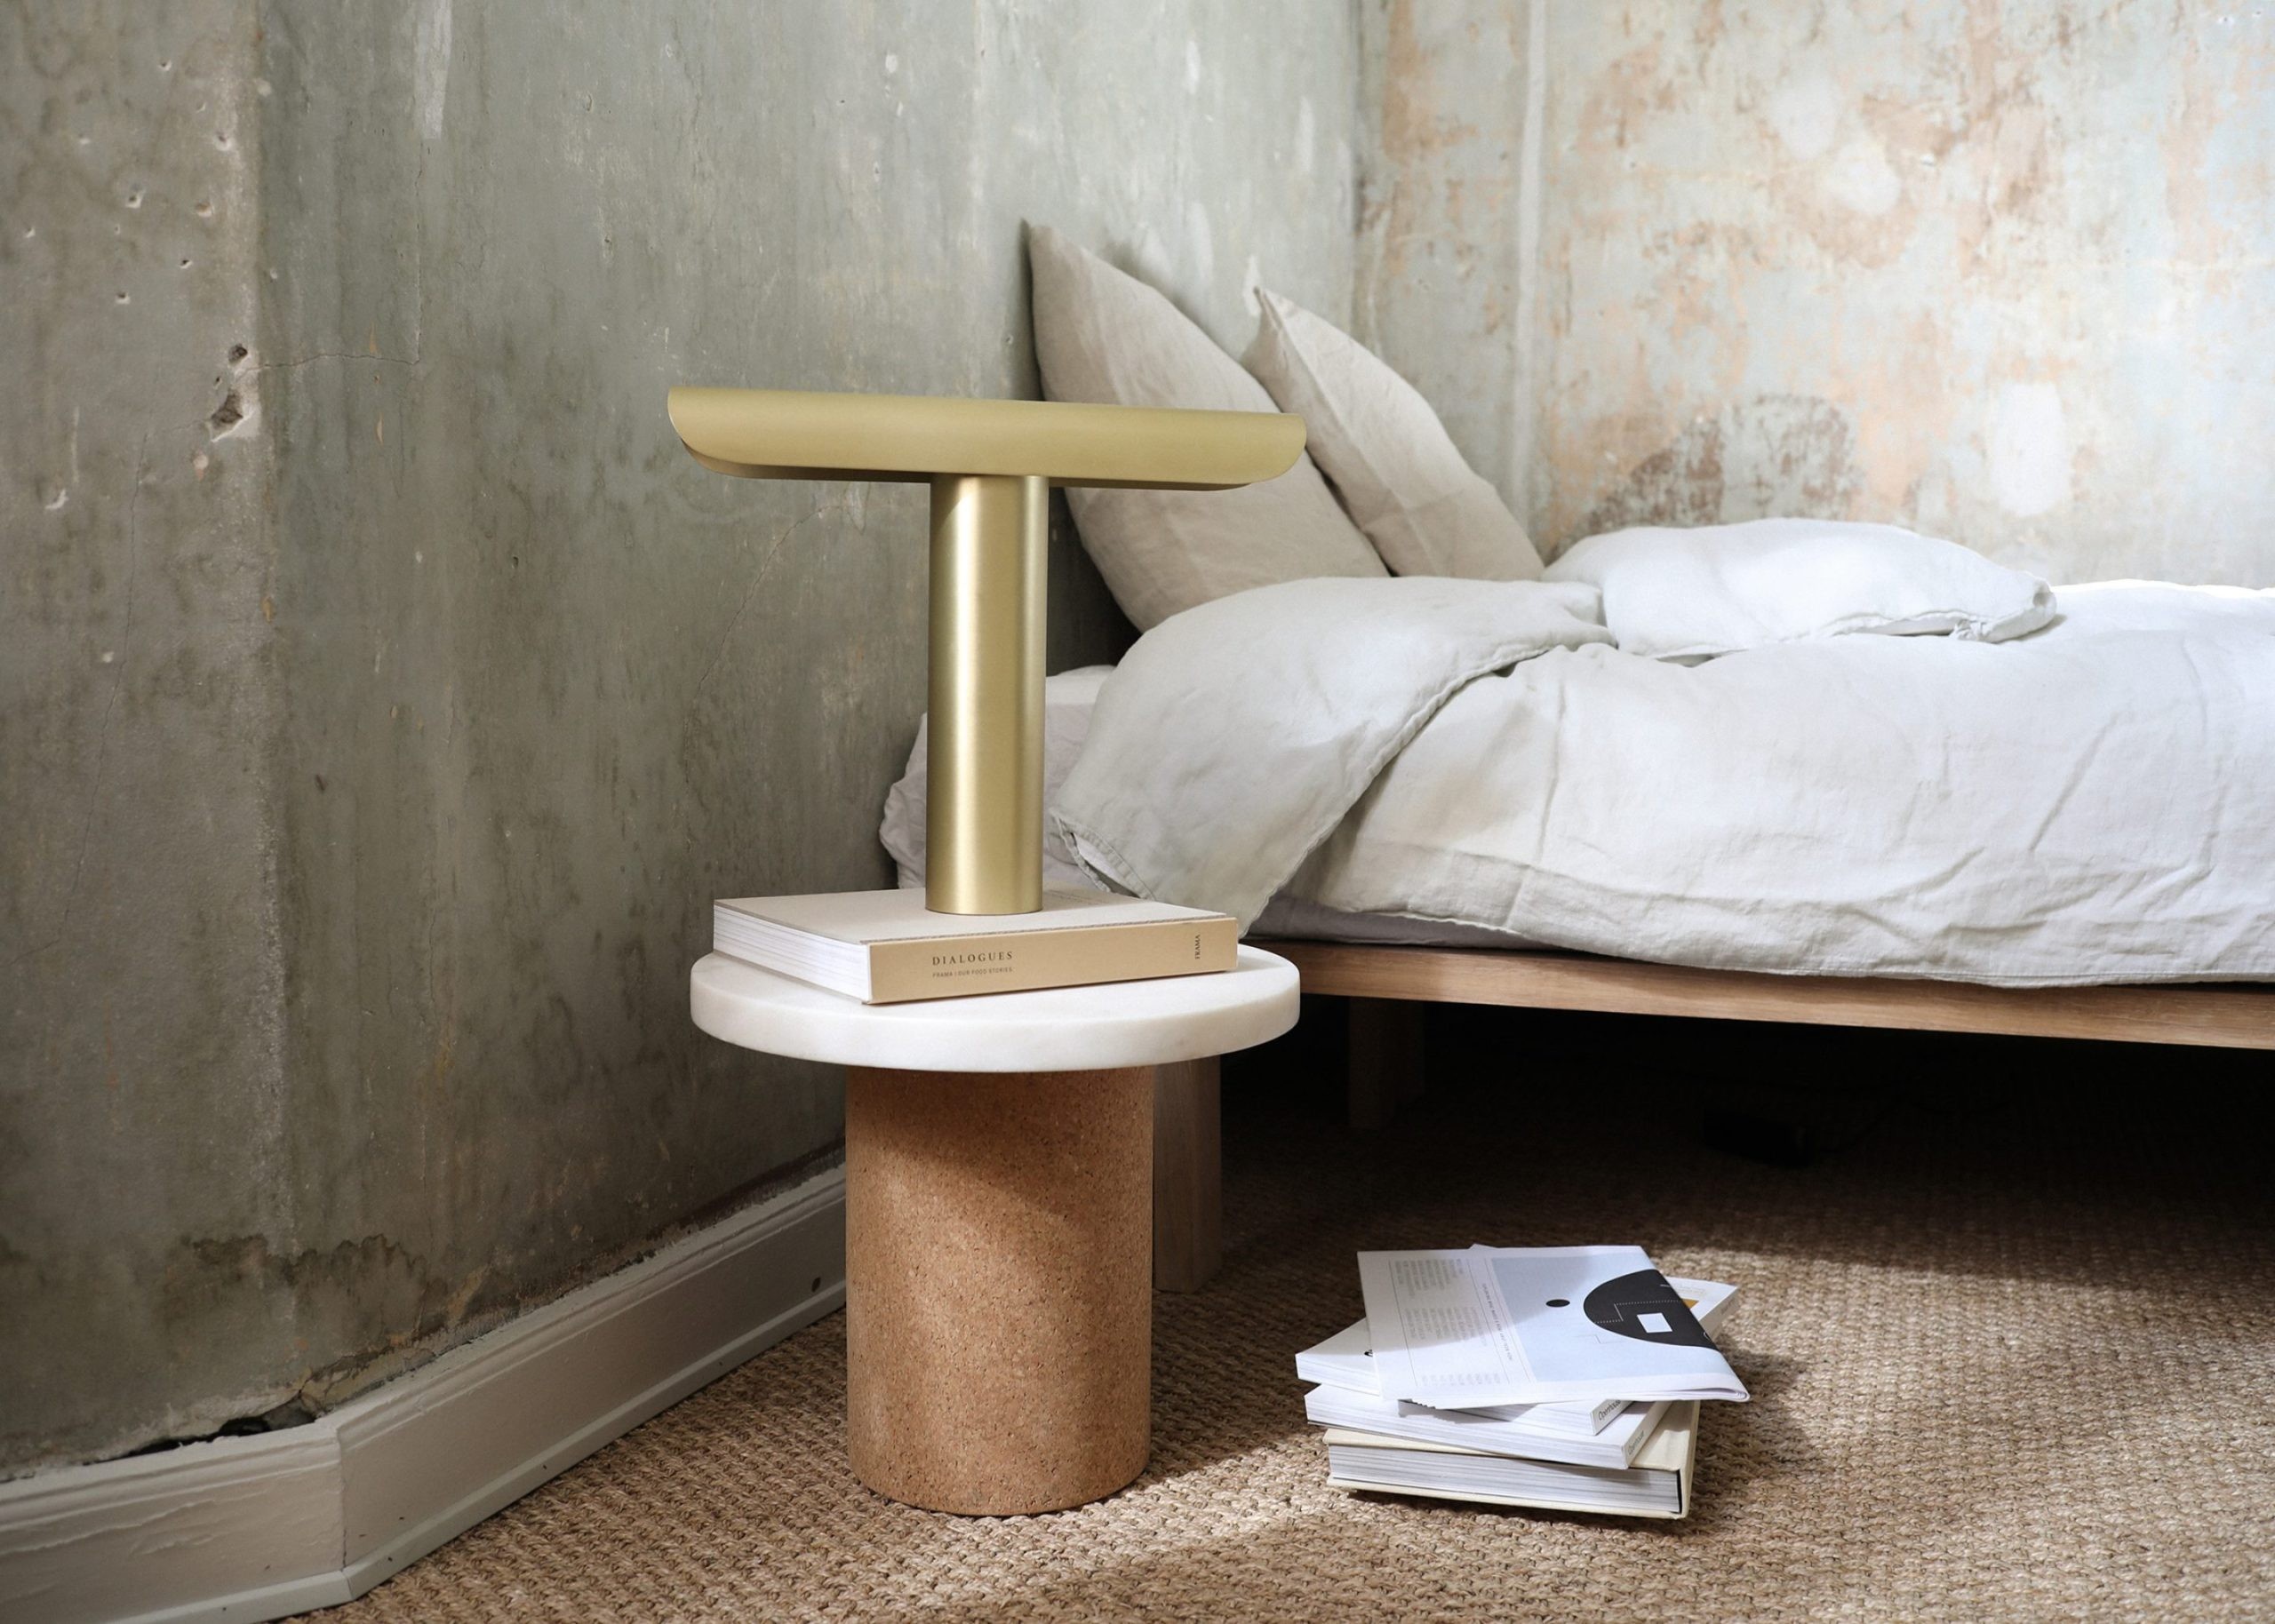 ignant brushed brass t lamp in industrial mens bedroom